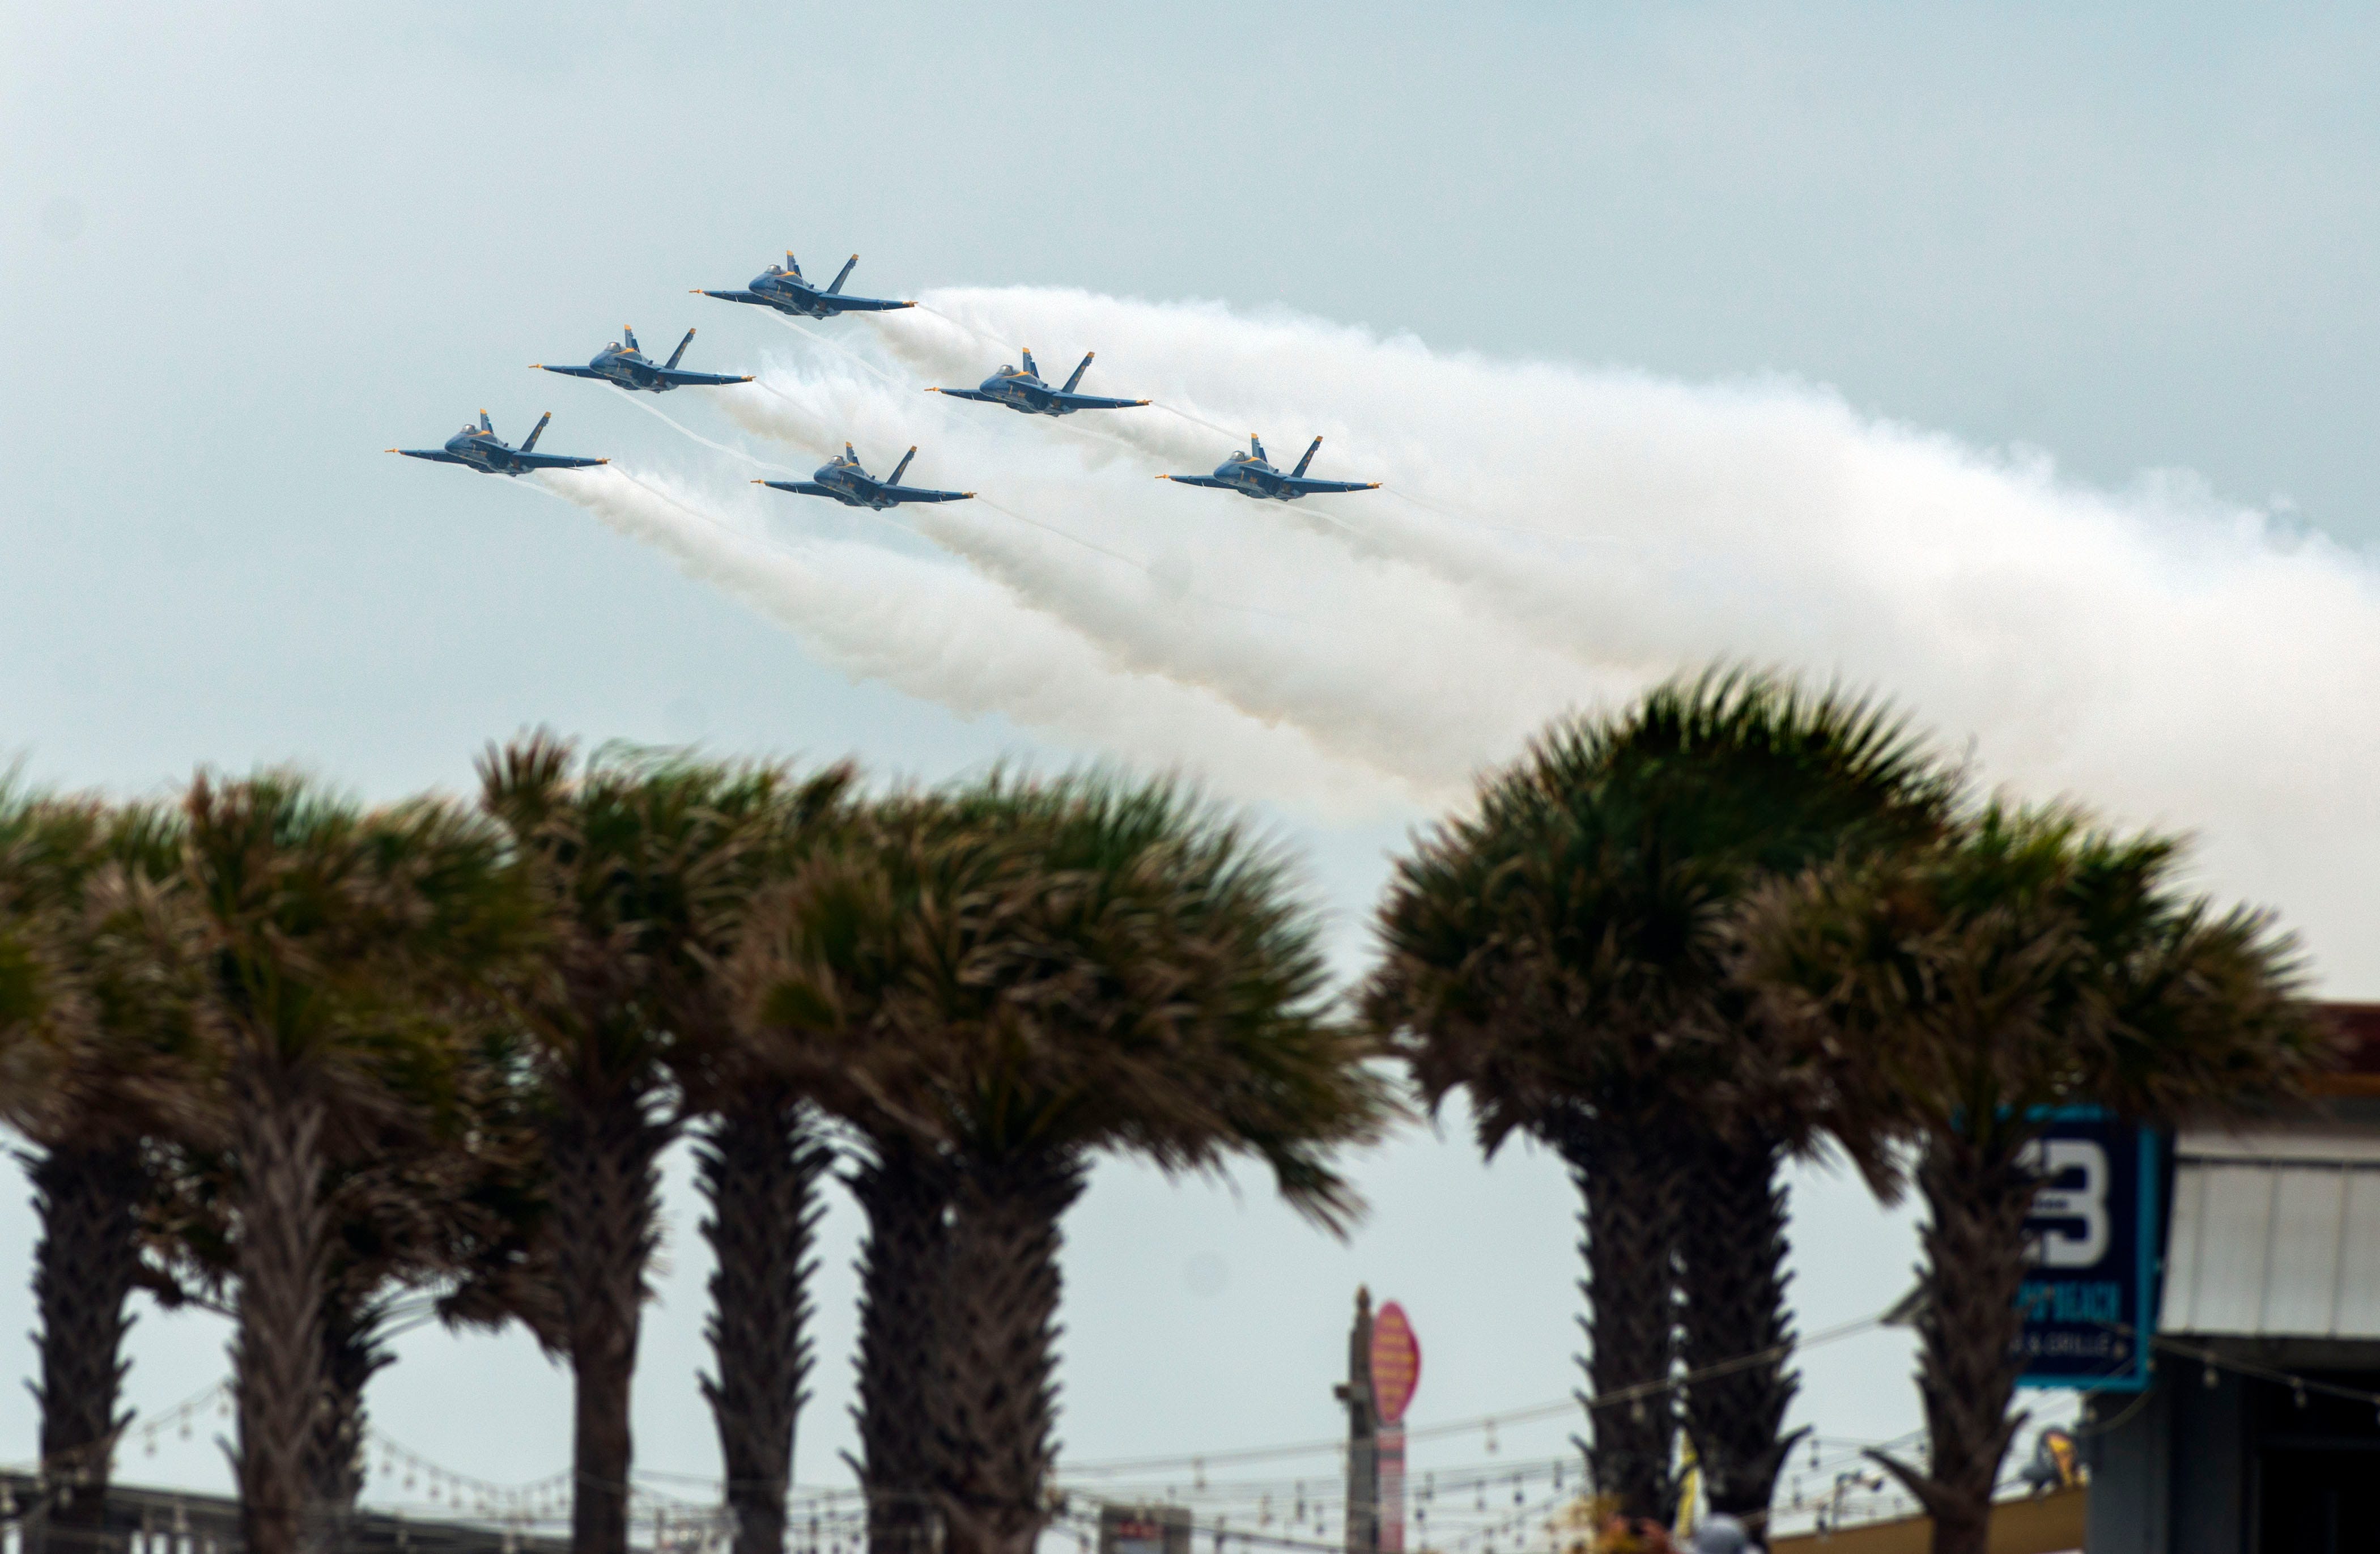 Blue Angels Air Show fans get creative at Pensacola Beach to weather